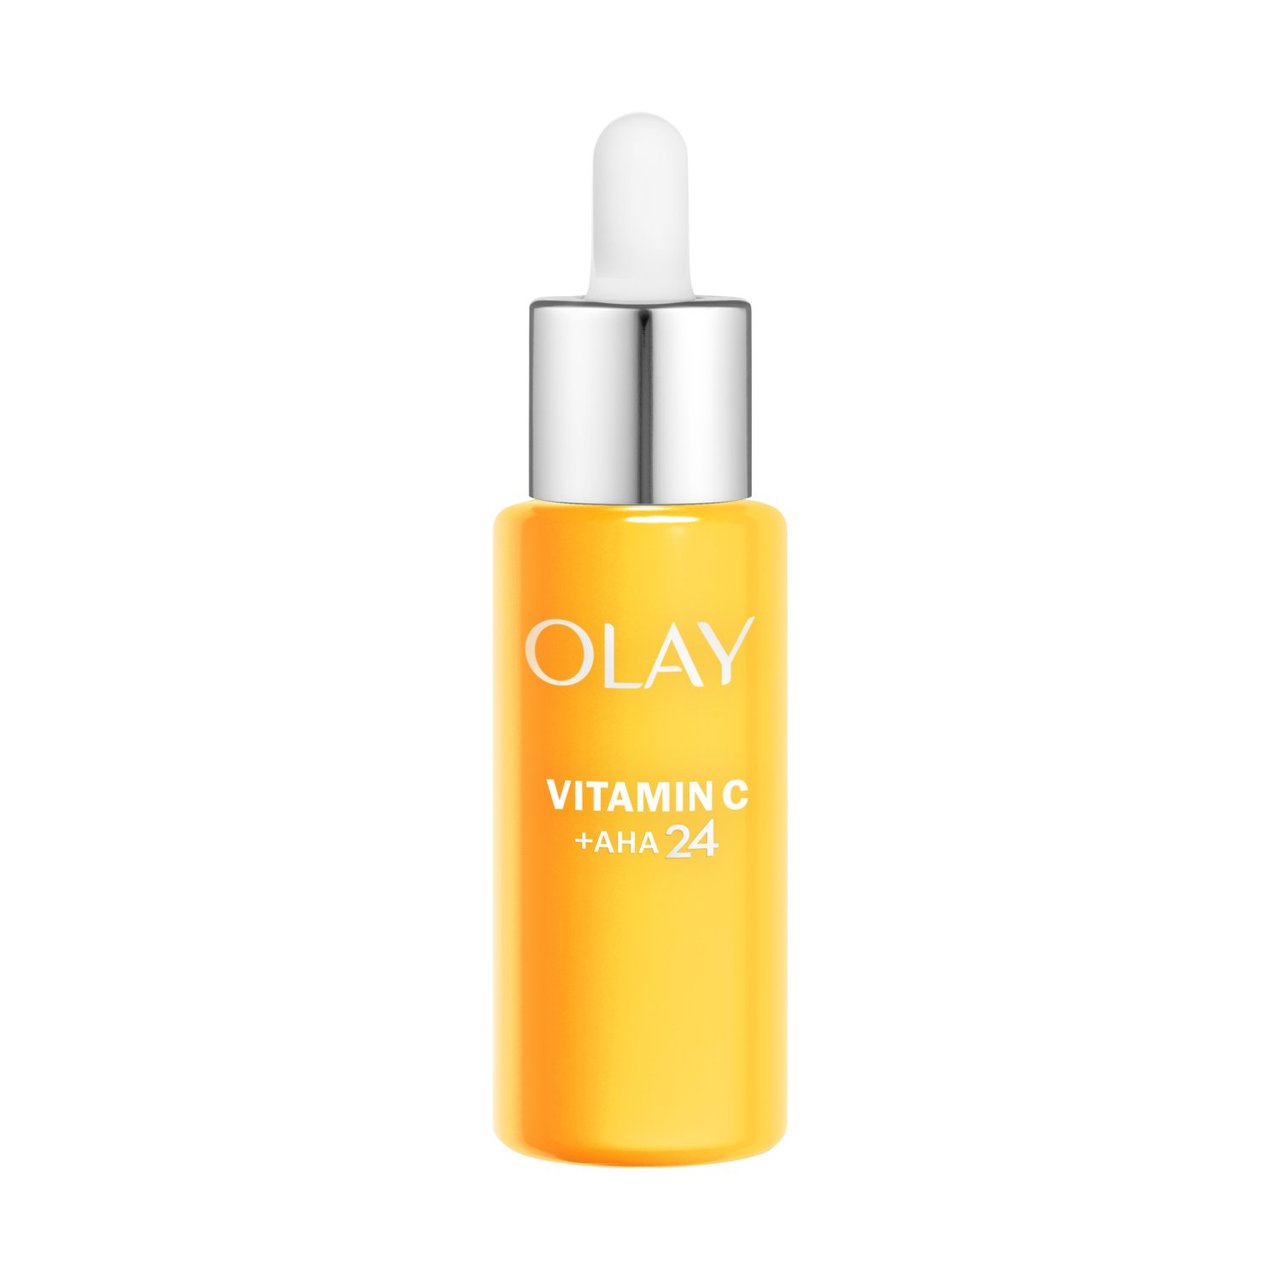 Olay Vitamin C + AHA24 Day Gel Serum For Bright And Even Tone